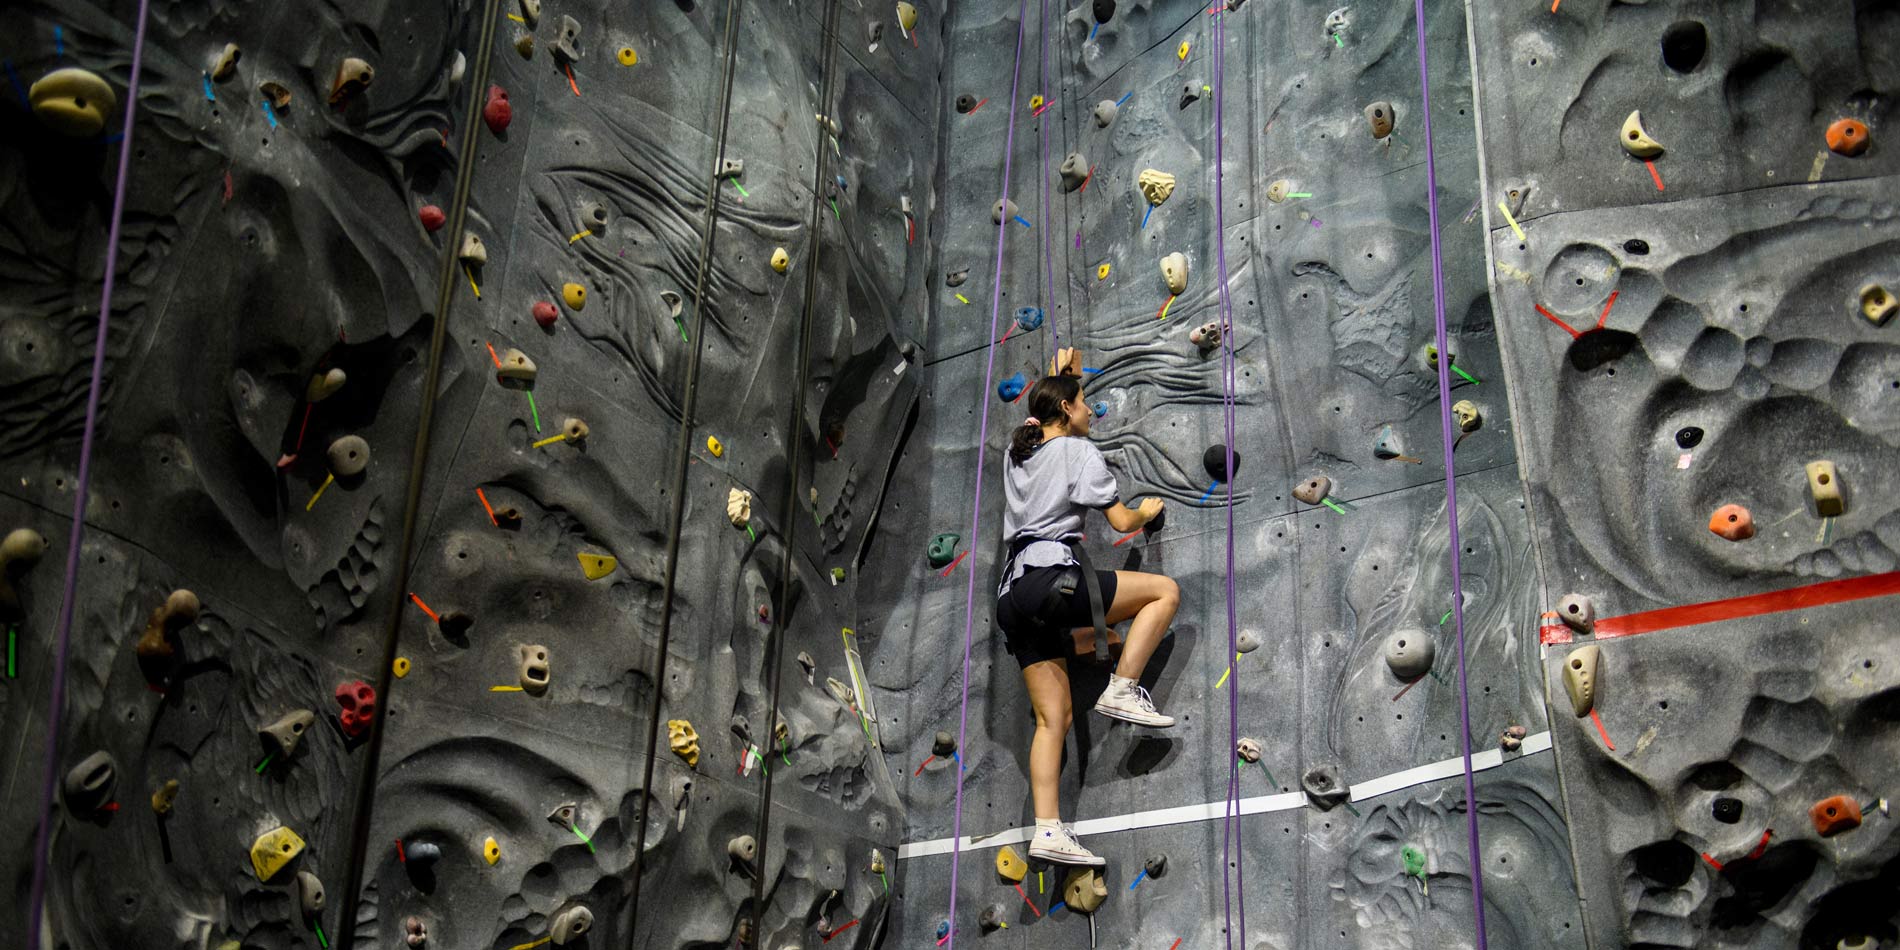 A student climbs the rock climbing wall at the student recreation center on campus.